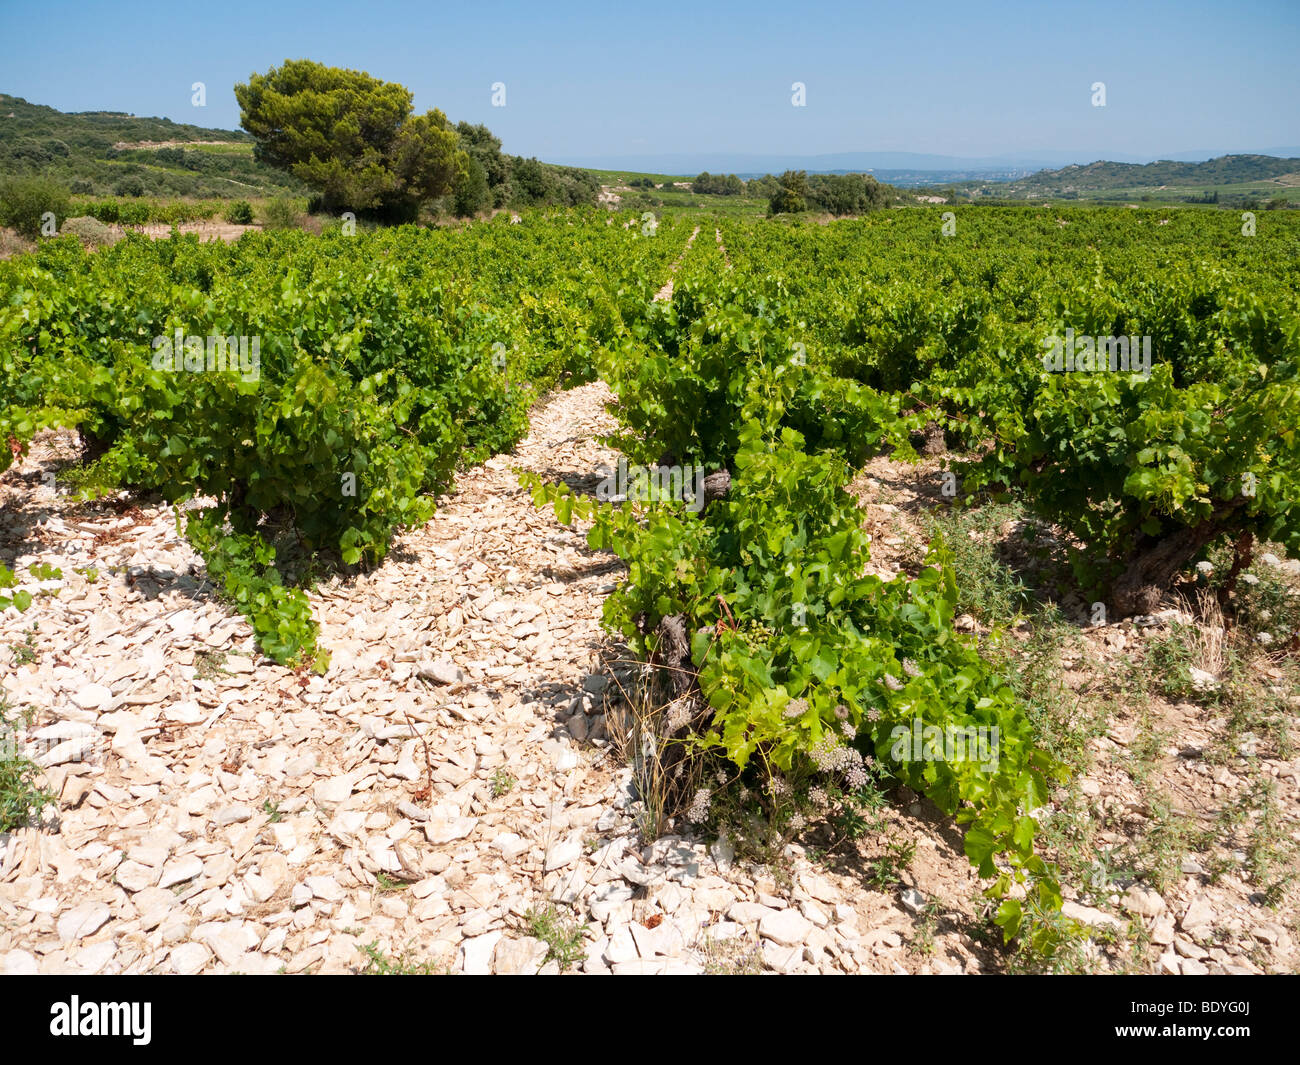 A vineyard in the wine growing area of Tavel. Stock Photo